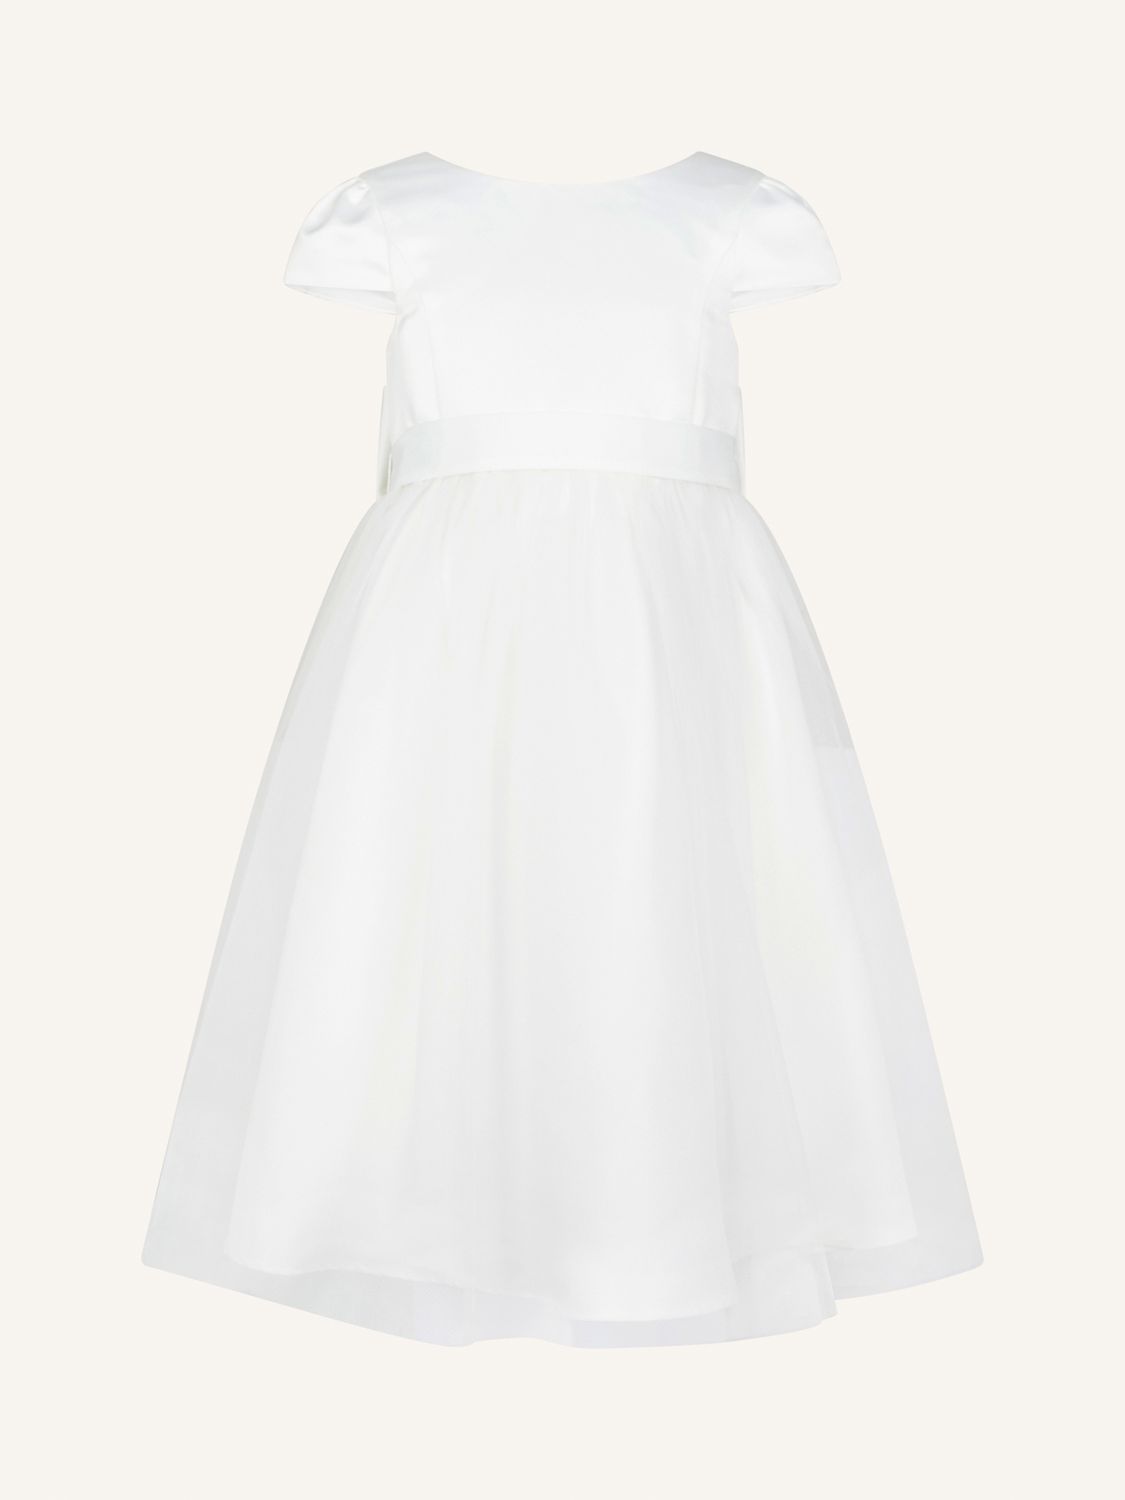 Monsoon Kids' Tulle Bow Bridesmaid Dress, Ivory, 8 years